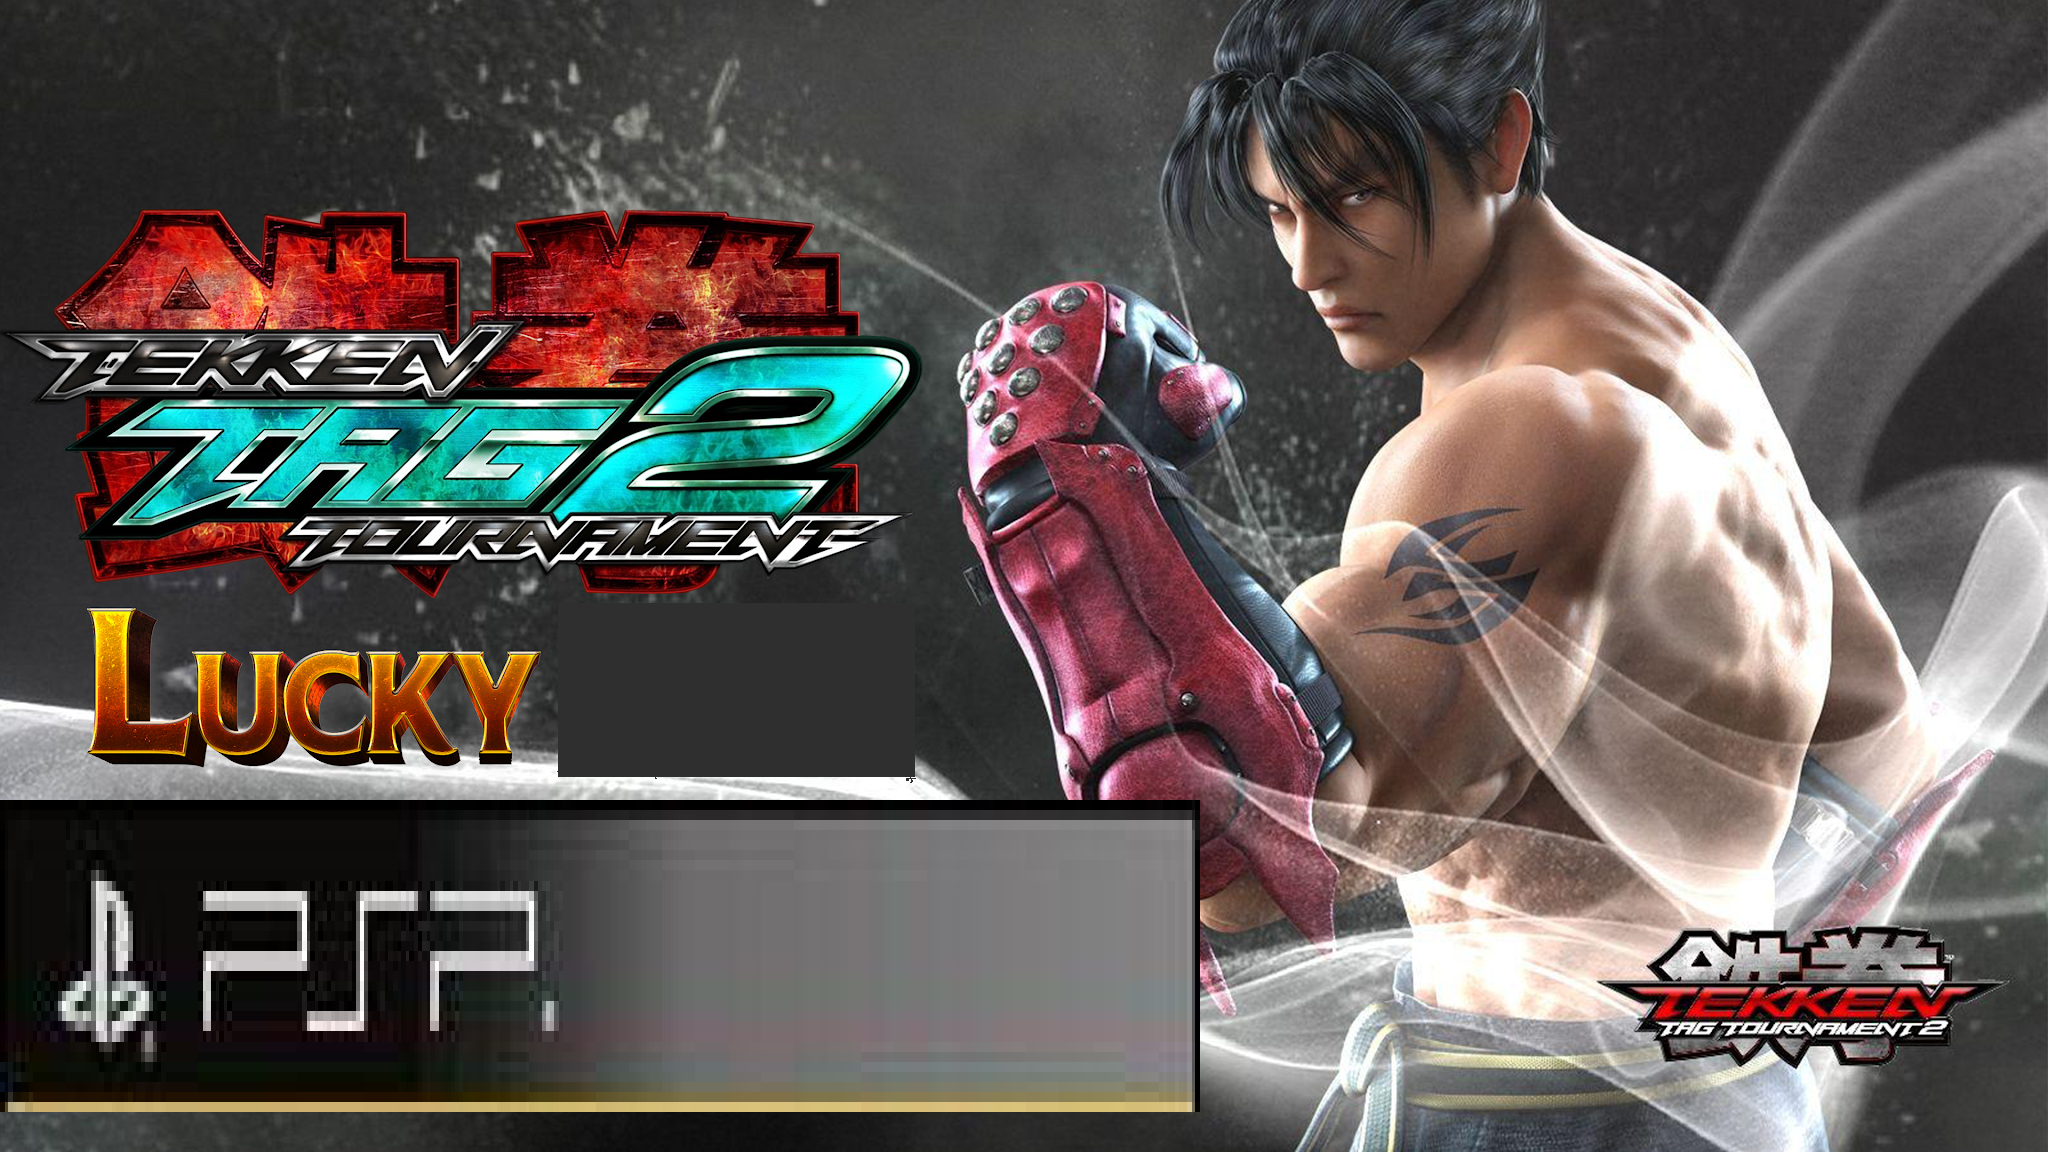 https://s17.picofile.com/file/8413978284/Tekken_Tag_Tournament_2_LUCKY_PSP_Cover.png